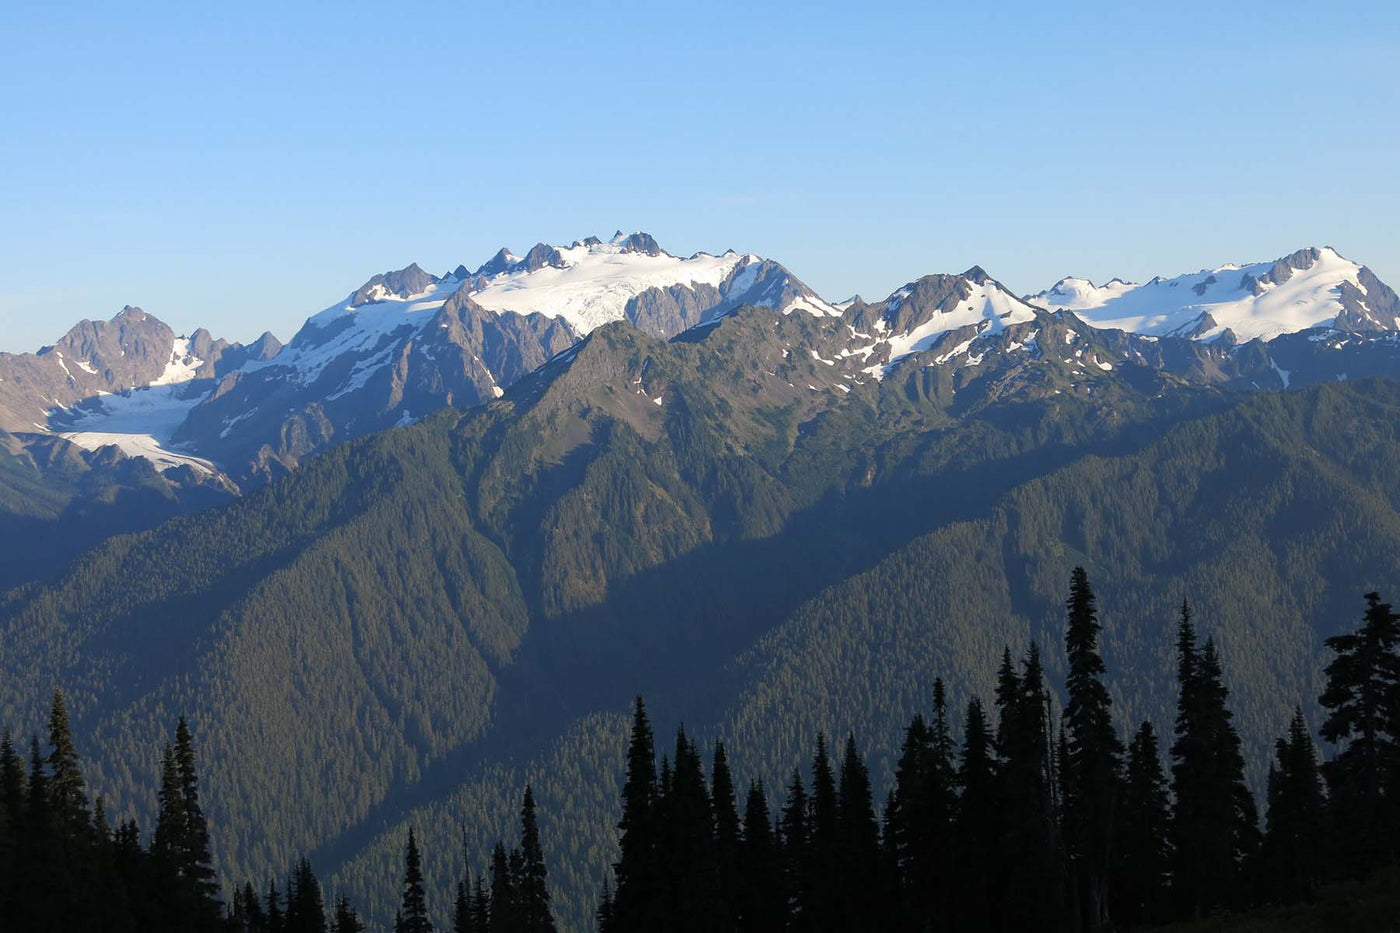 Hike of the Week: Olympic National Park - Hoh River to Sol Duc